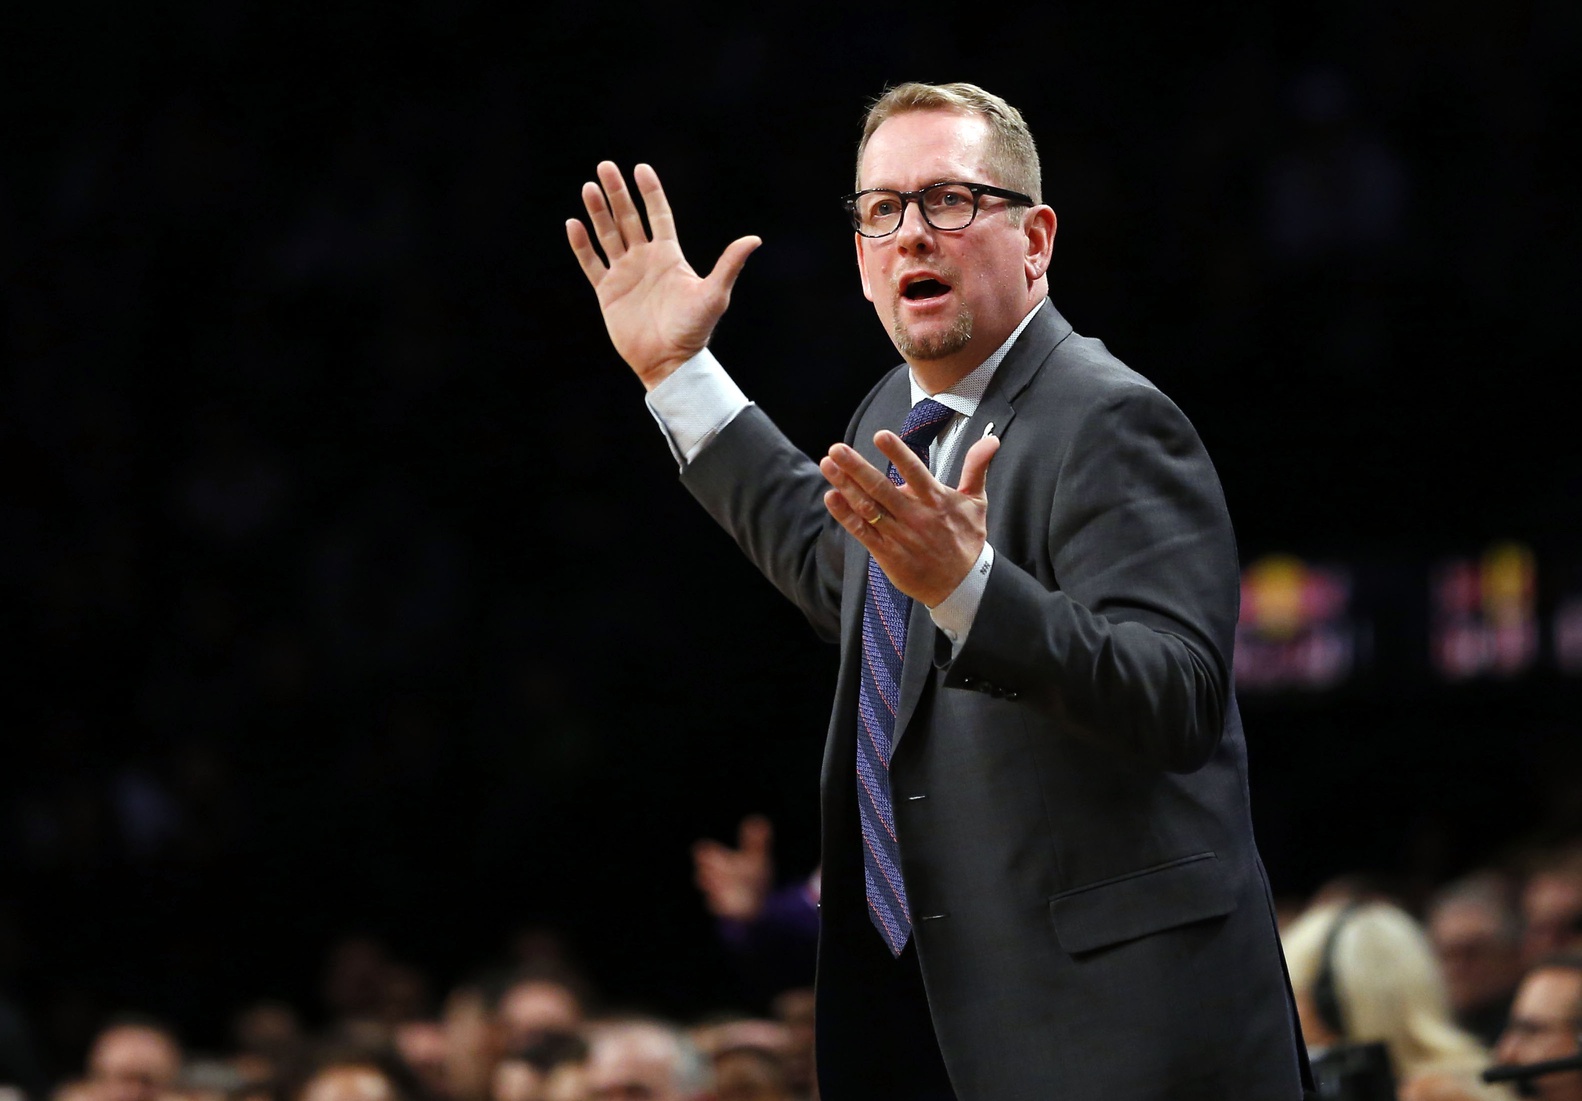 Nick Nurse turns into Internet meme with astonished reaction to turnover